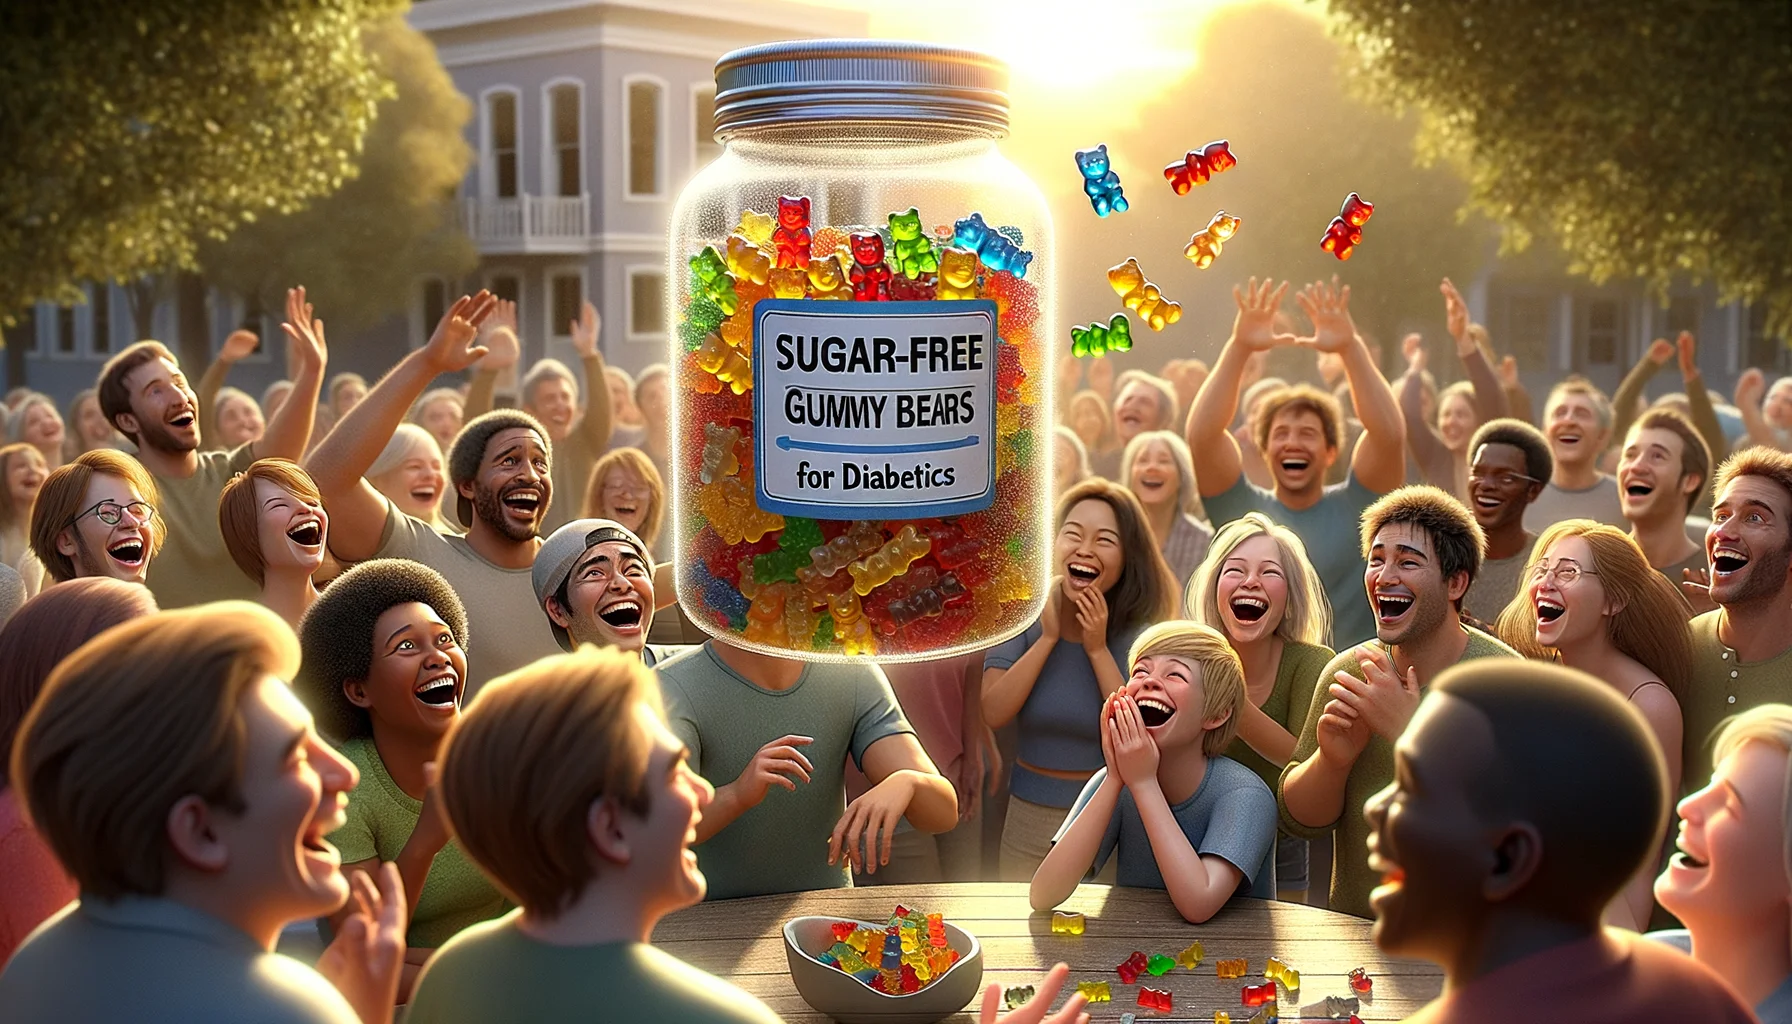 Imagine a lighthearted, amusing scene unfolding on a sunny afternoon. In clear focus is a large glass jar, shining with reflected sunlight, brimming with sugar-free gummy bears of various vibrant colors. The label on the jar clearly reads 'Sugar-Free Gummy Bears for Diabetics'. Around the jar are happy people of different genders and descents, visually representing diabetics, examining and enjoying these colorful treats. There's laughter, camaraderie, and a sense of joy in the air, perhaps from a joke just said. The onlookers' expressions range from delighted surprise to outright guffaws, making the scenario realistic yet amusing.